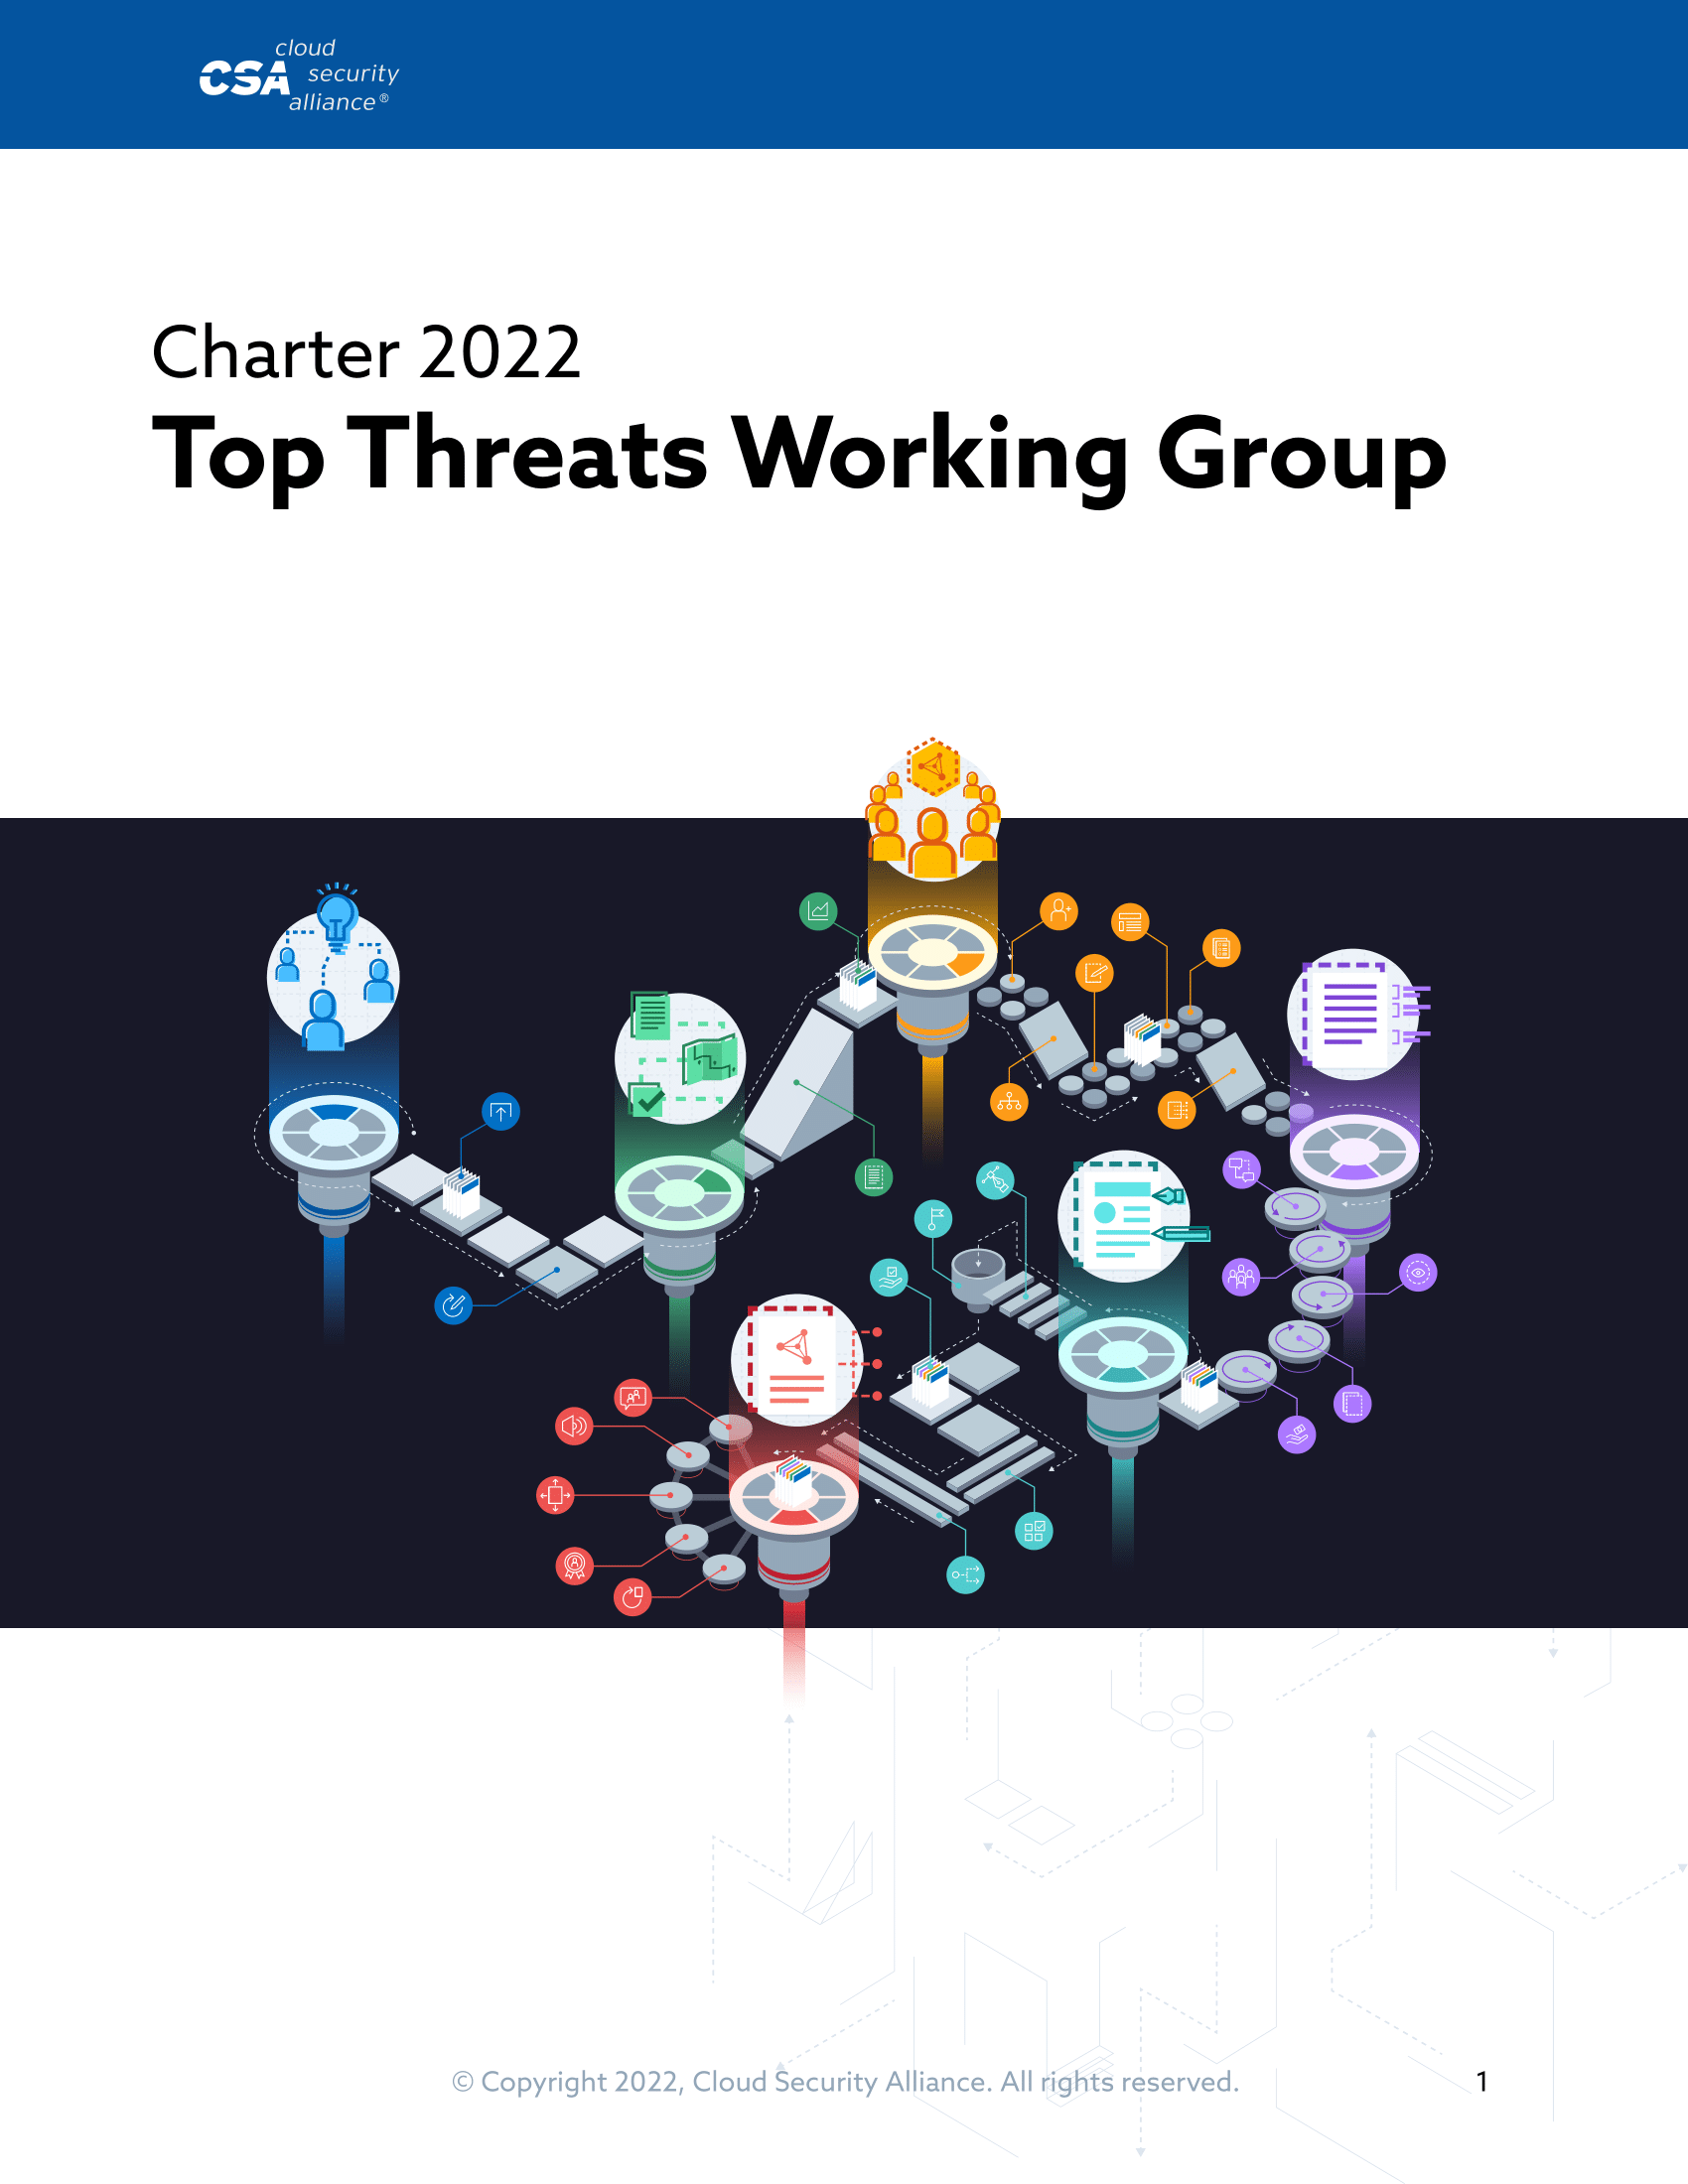 Top Threats Working Group Charter 2022